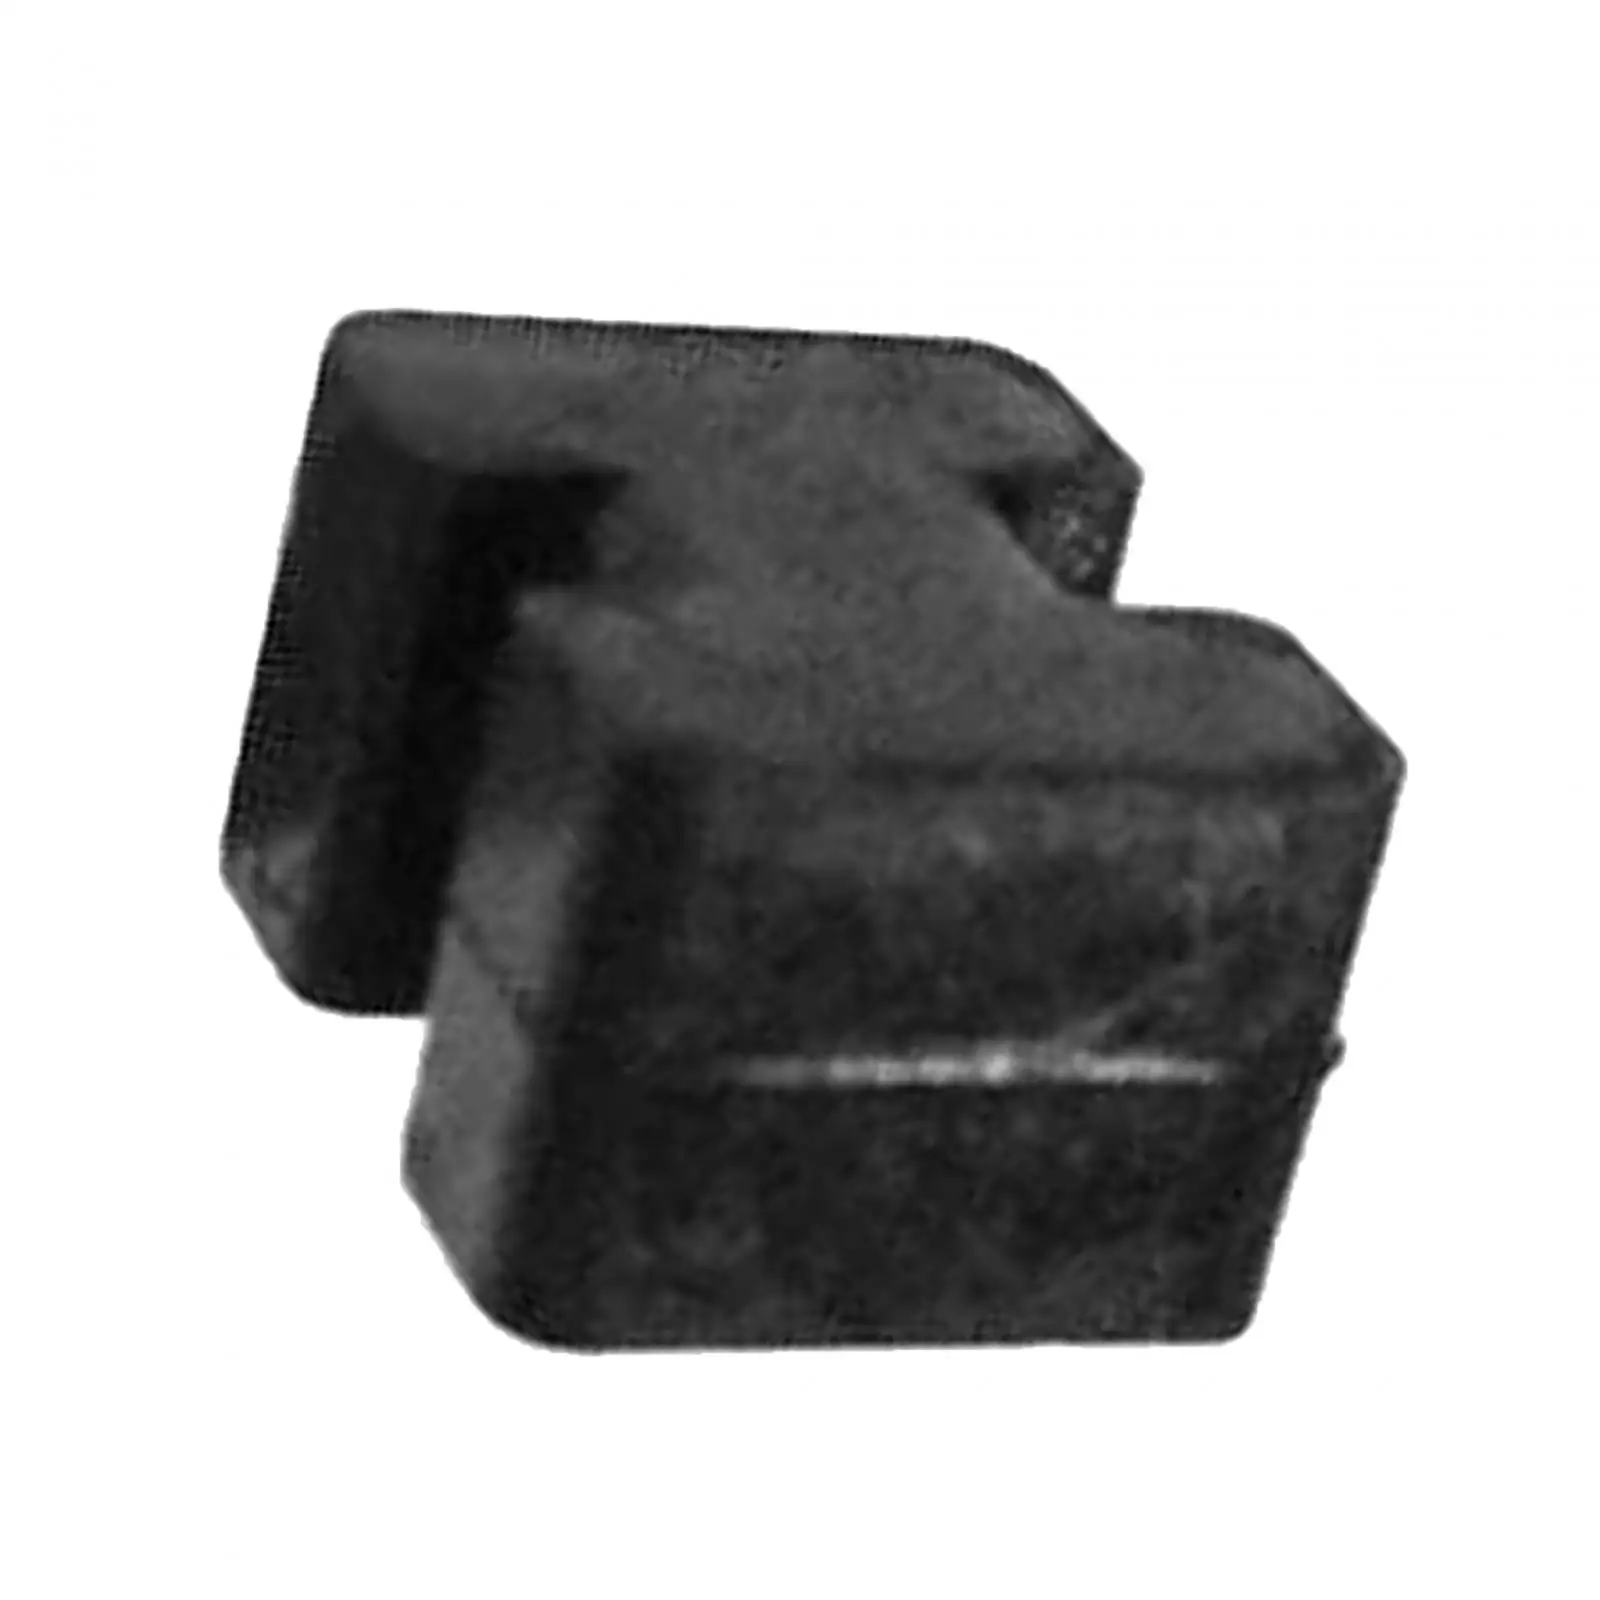 Cable 2 Protect Part 703-48358-00-00 Easily Install Durable Replacement Accessory for Outboard Remote Controller Boat Parts